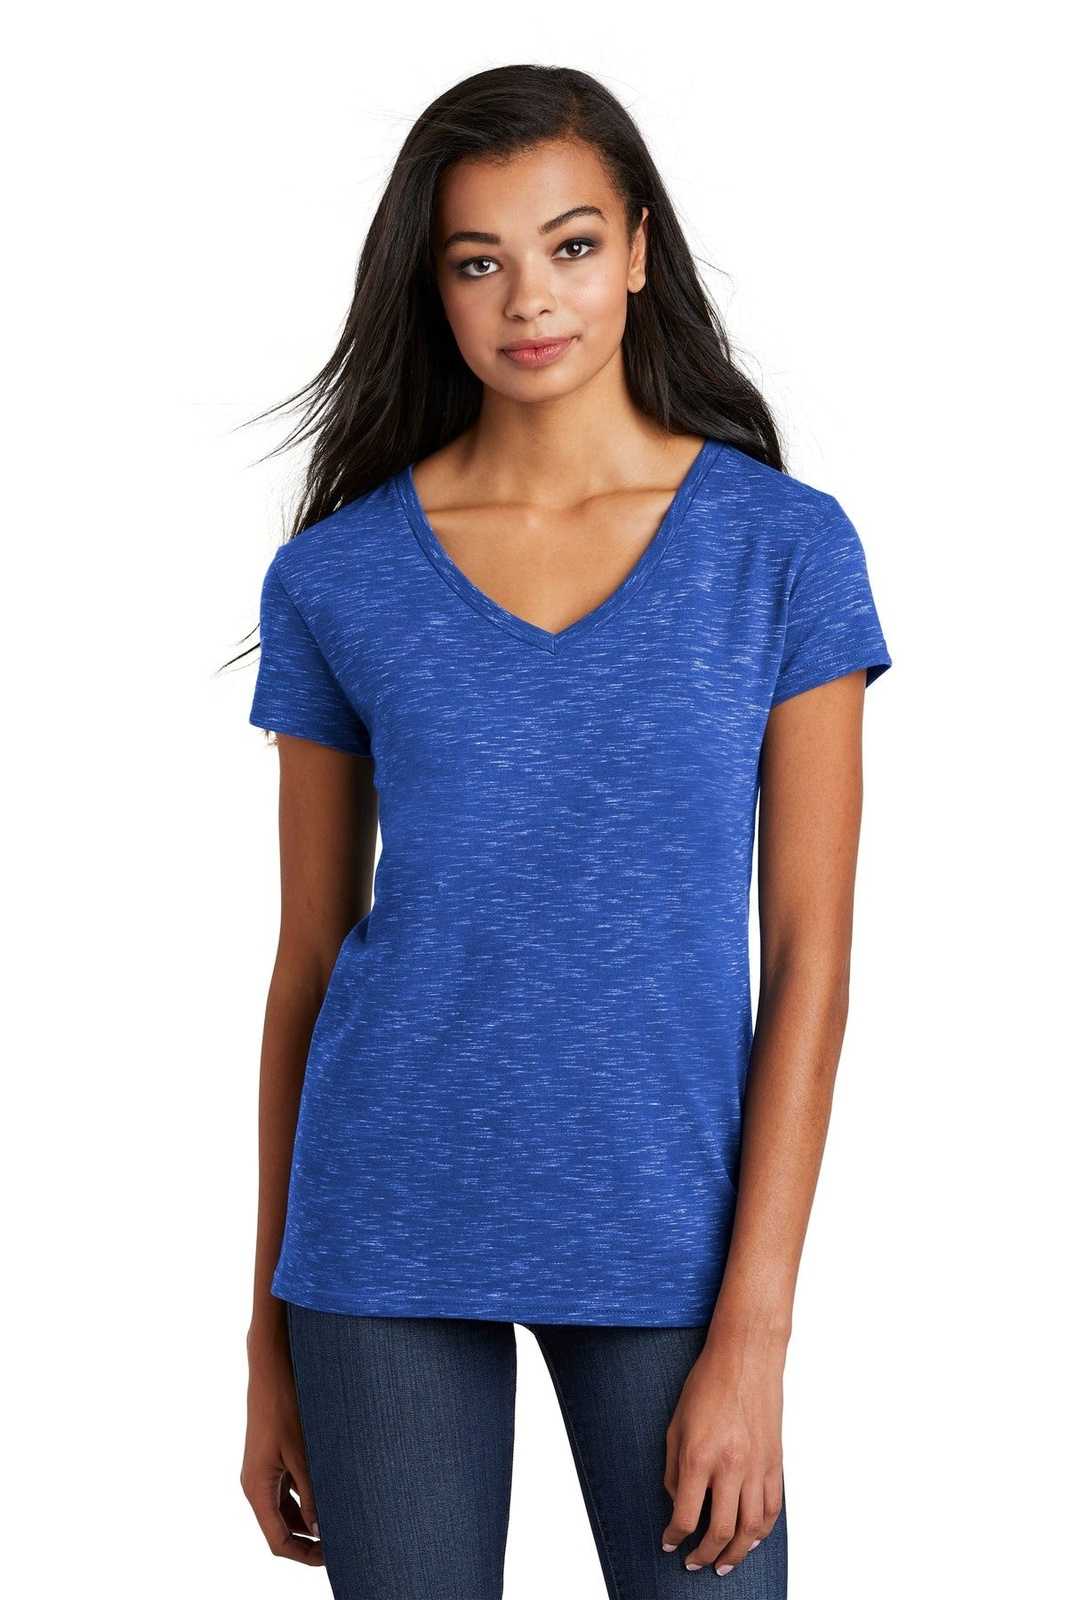 District DT664 Women's Medal V-Neck Tee - Deep Royal - HIT a Double - 1